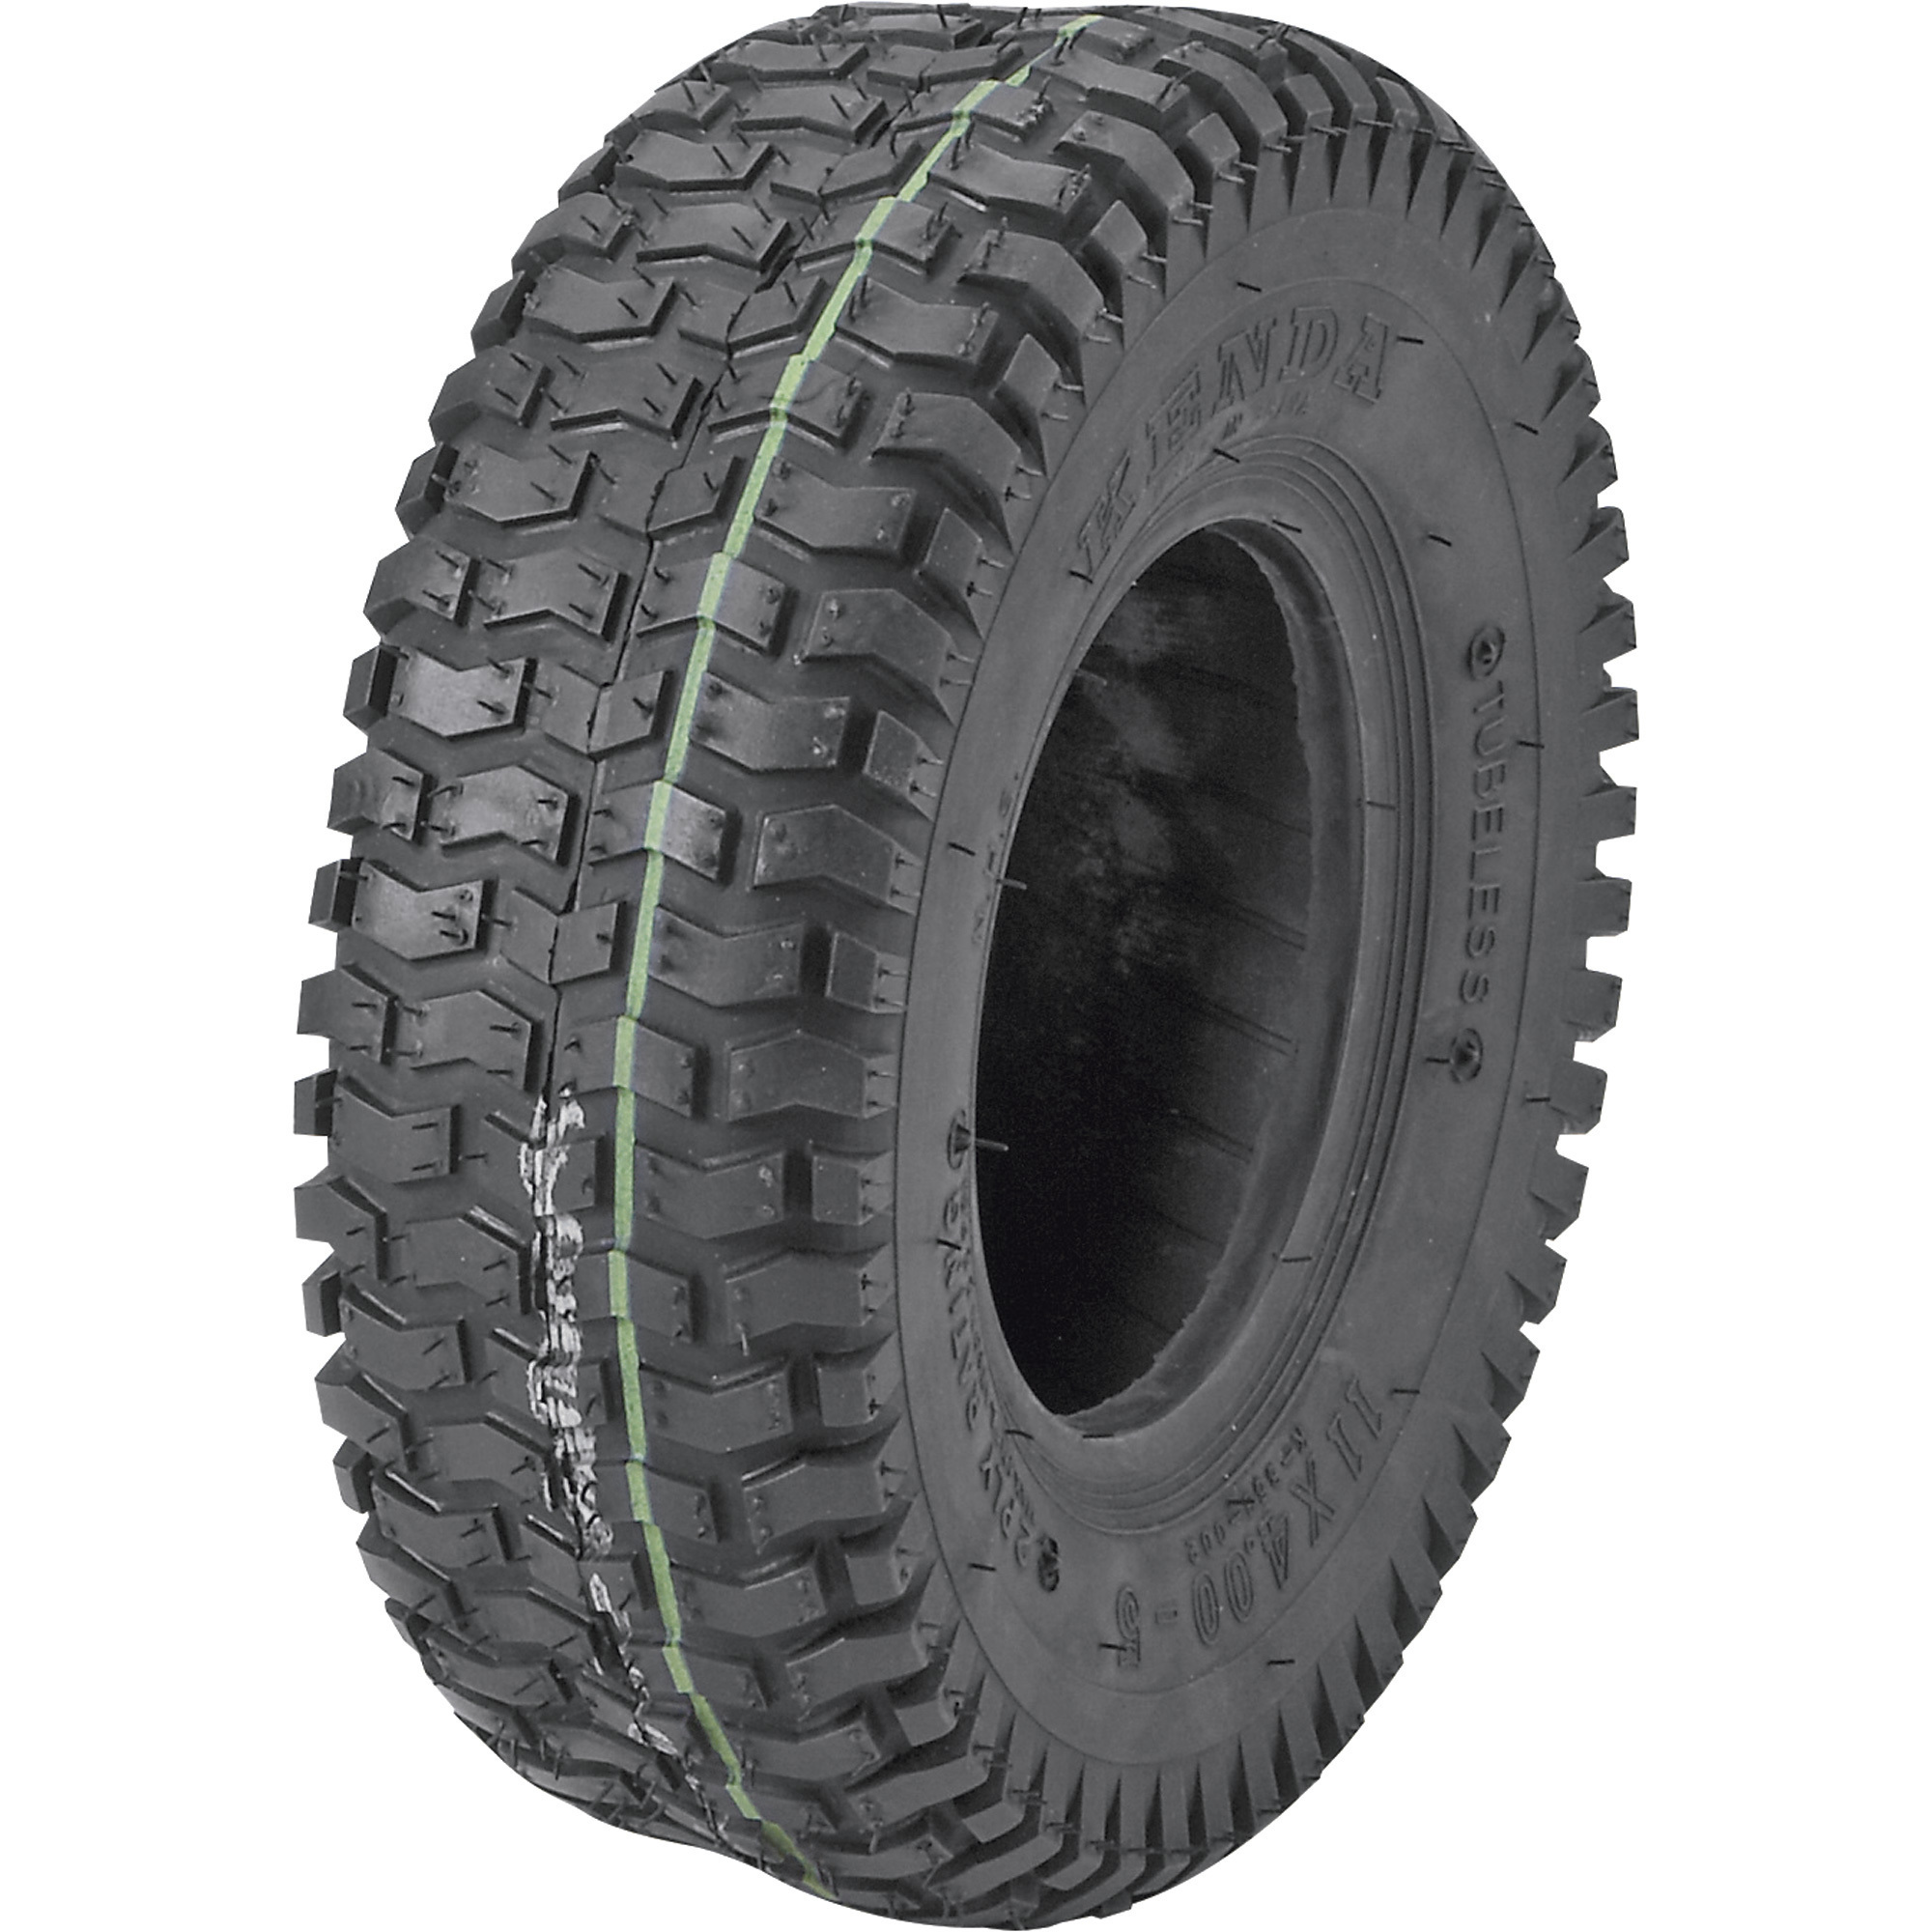 Kenda Lawn Tractor Replacement Tubeless Turf Tire â 16Inch x 650-8